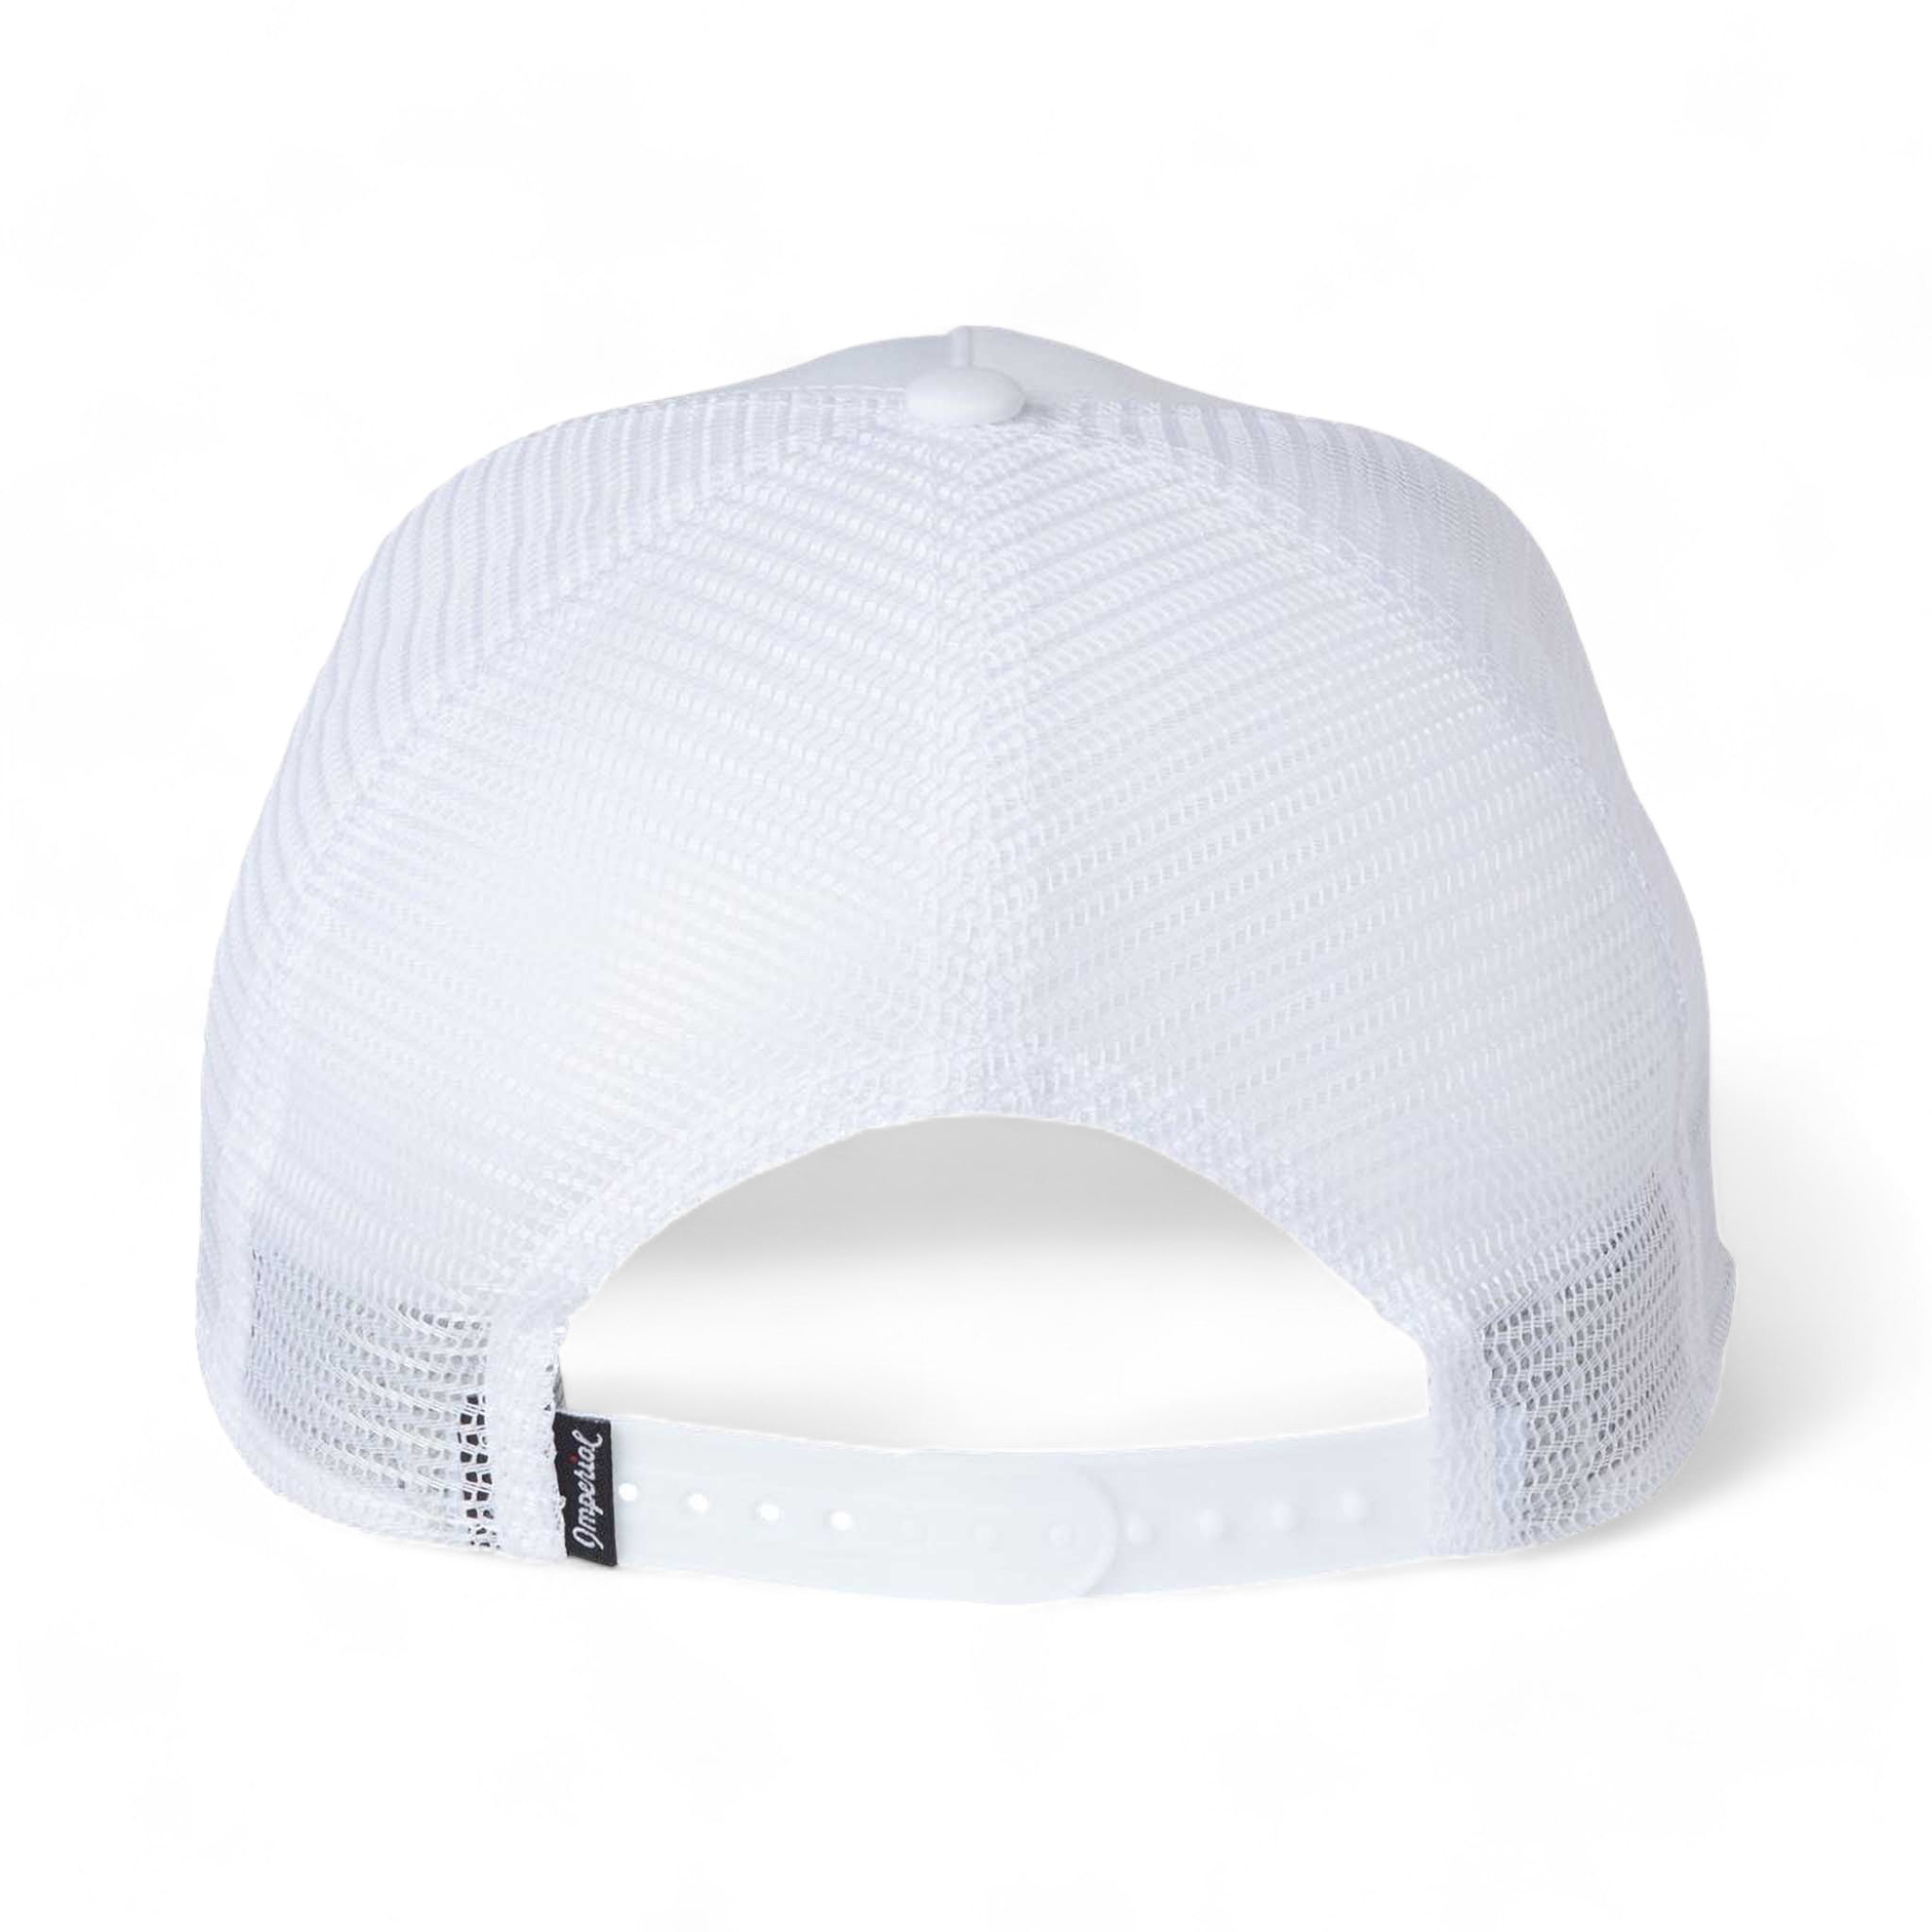 Back view of Imperial 5055 custom hat in white, white and black